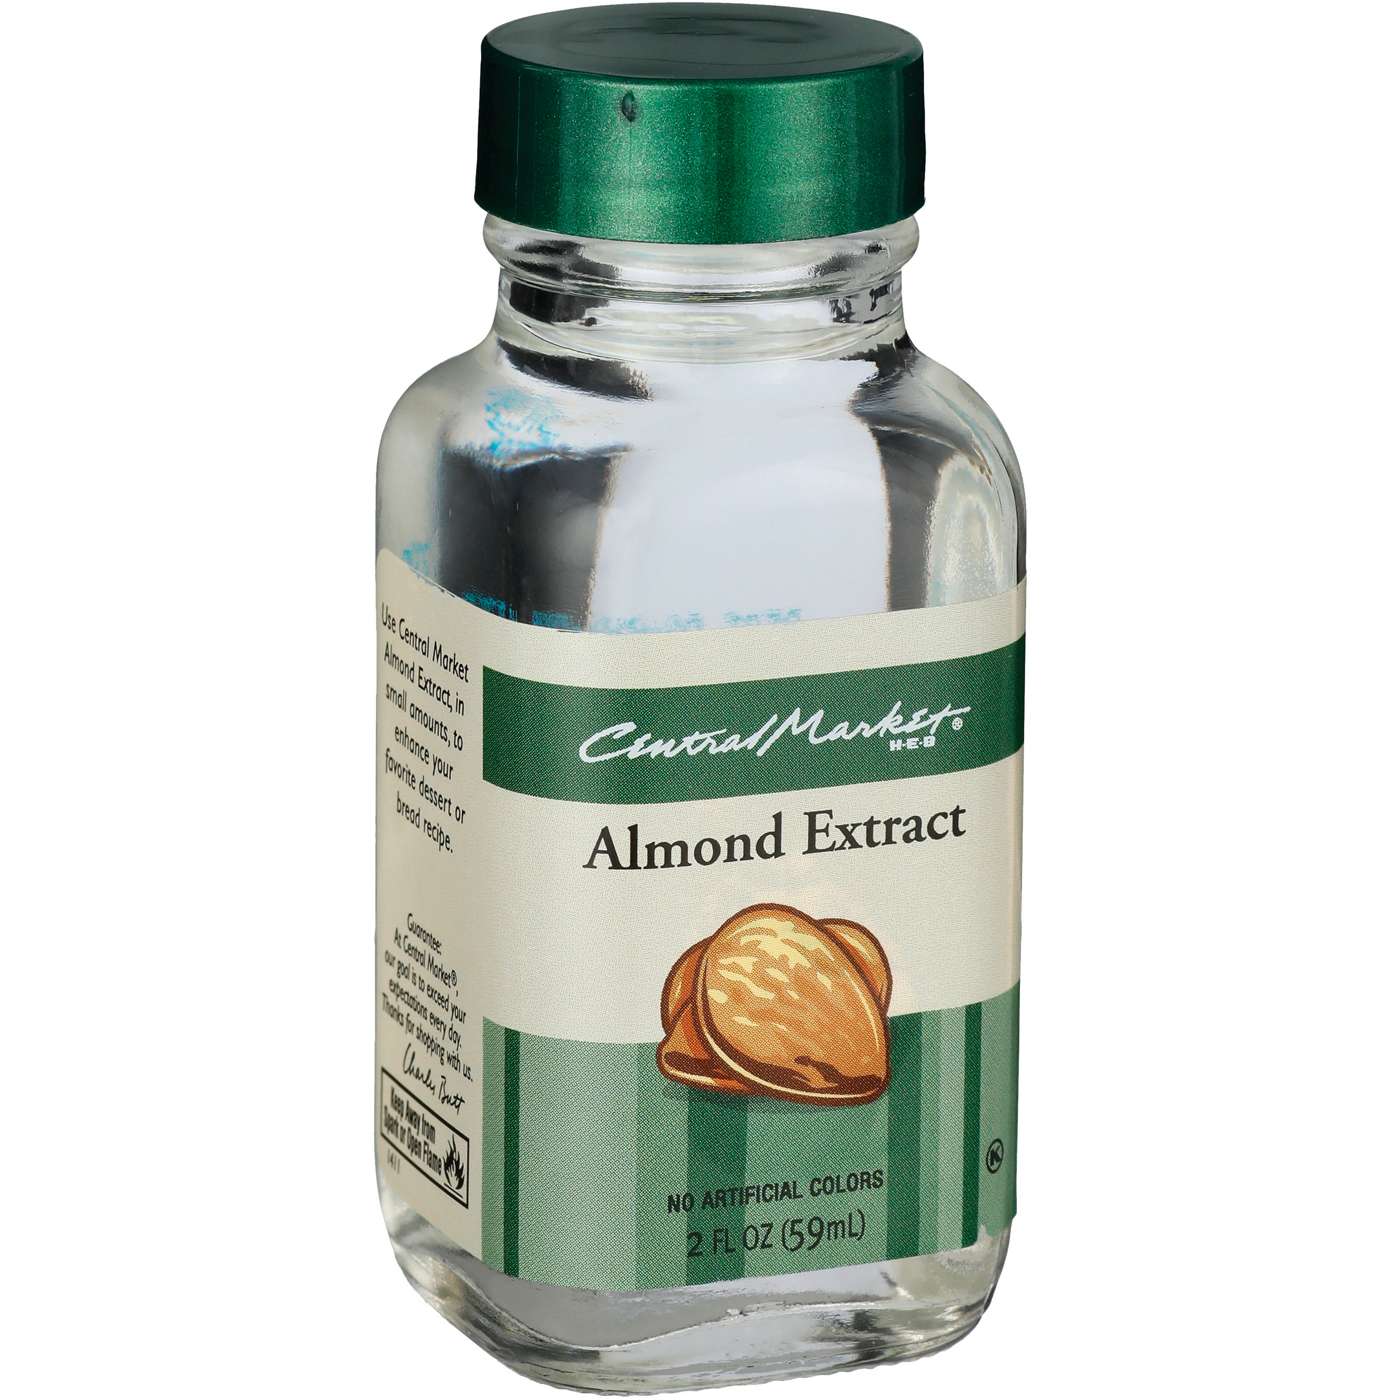 Central Market Almond Extract; image 2 of 2